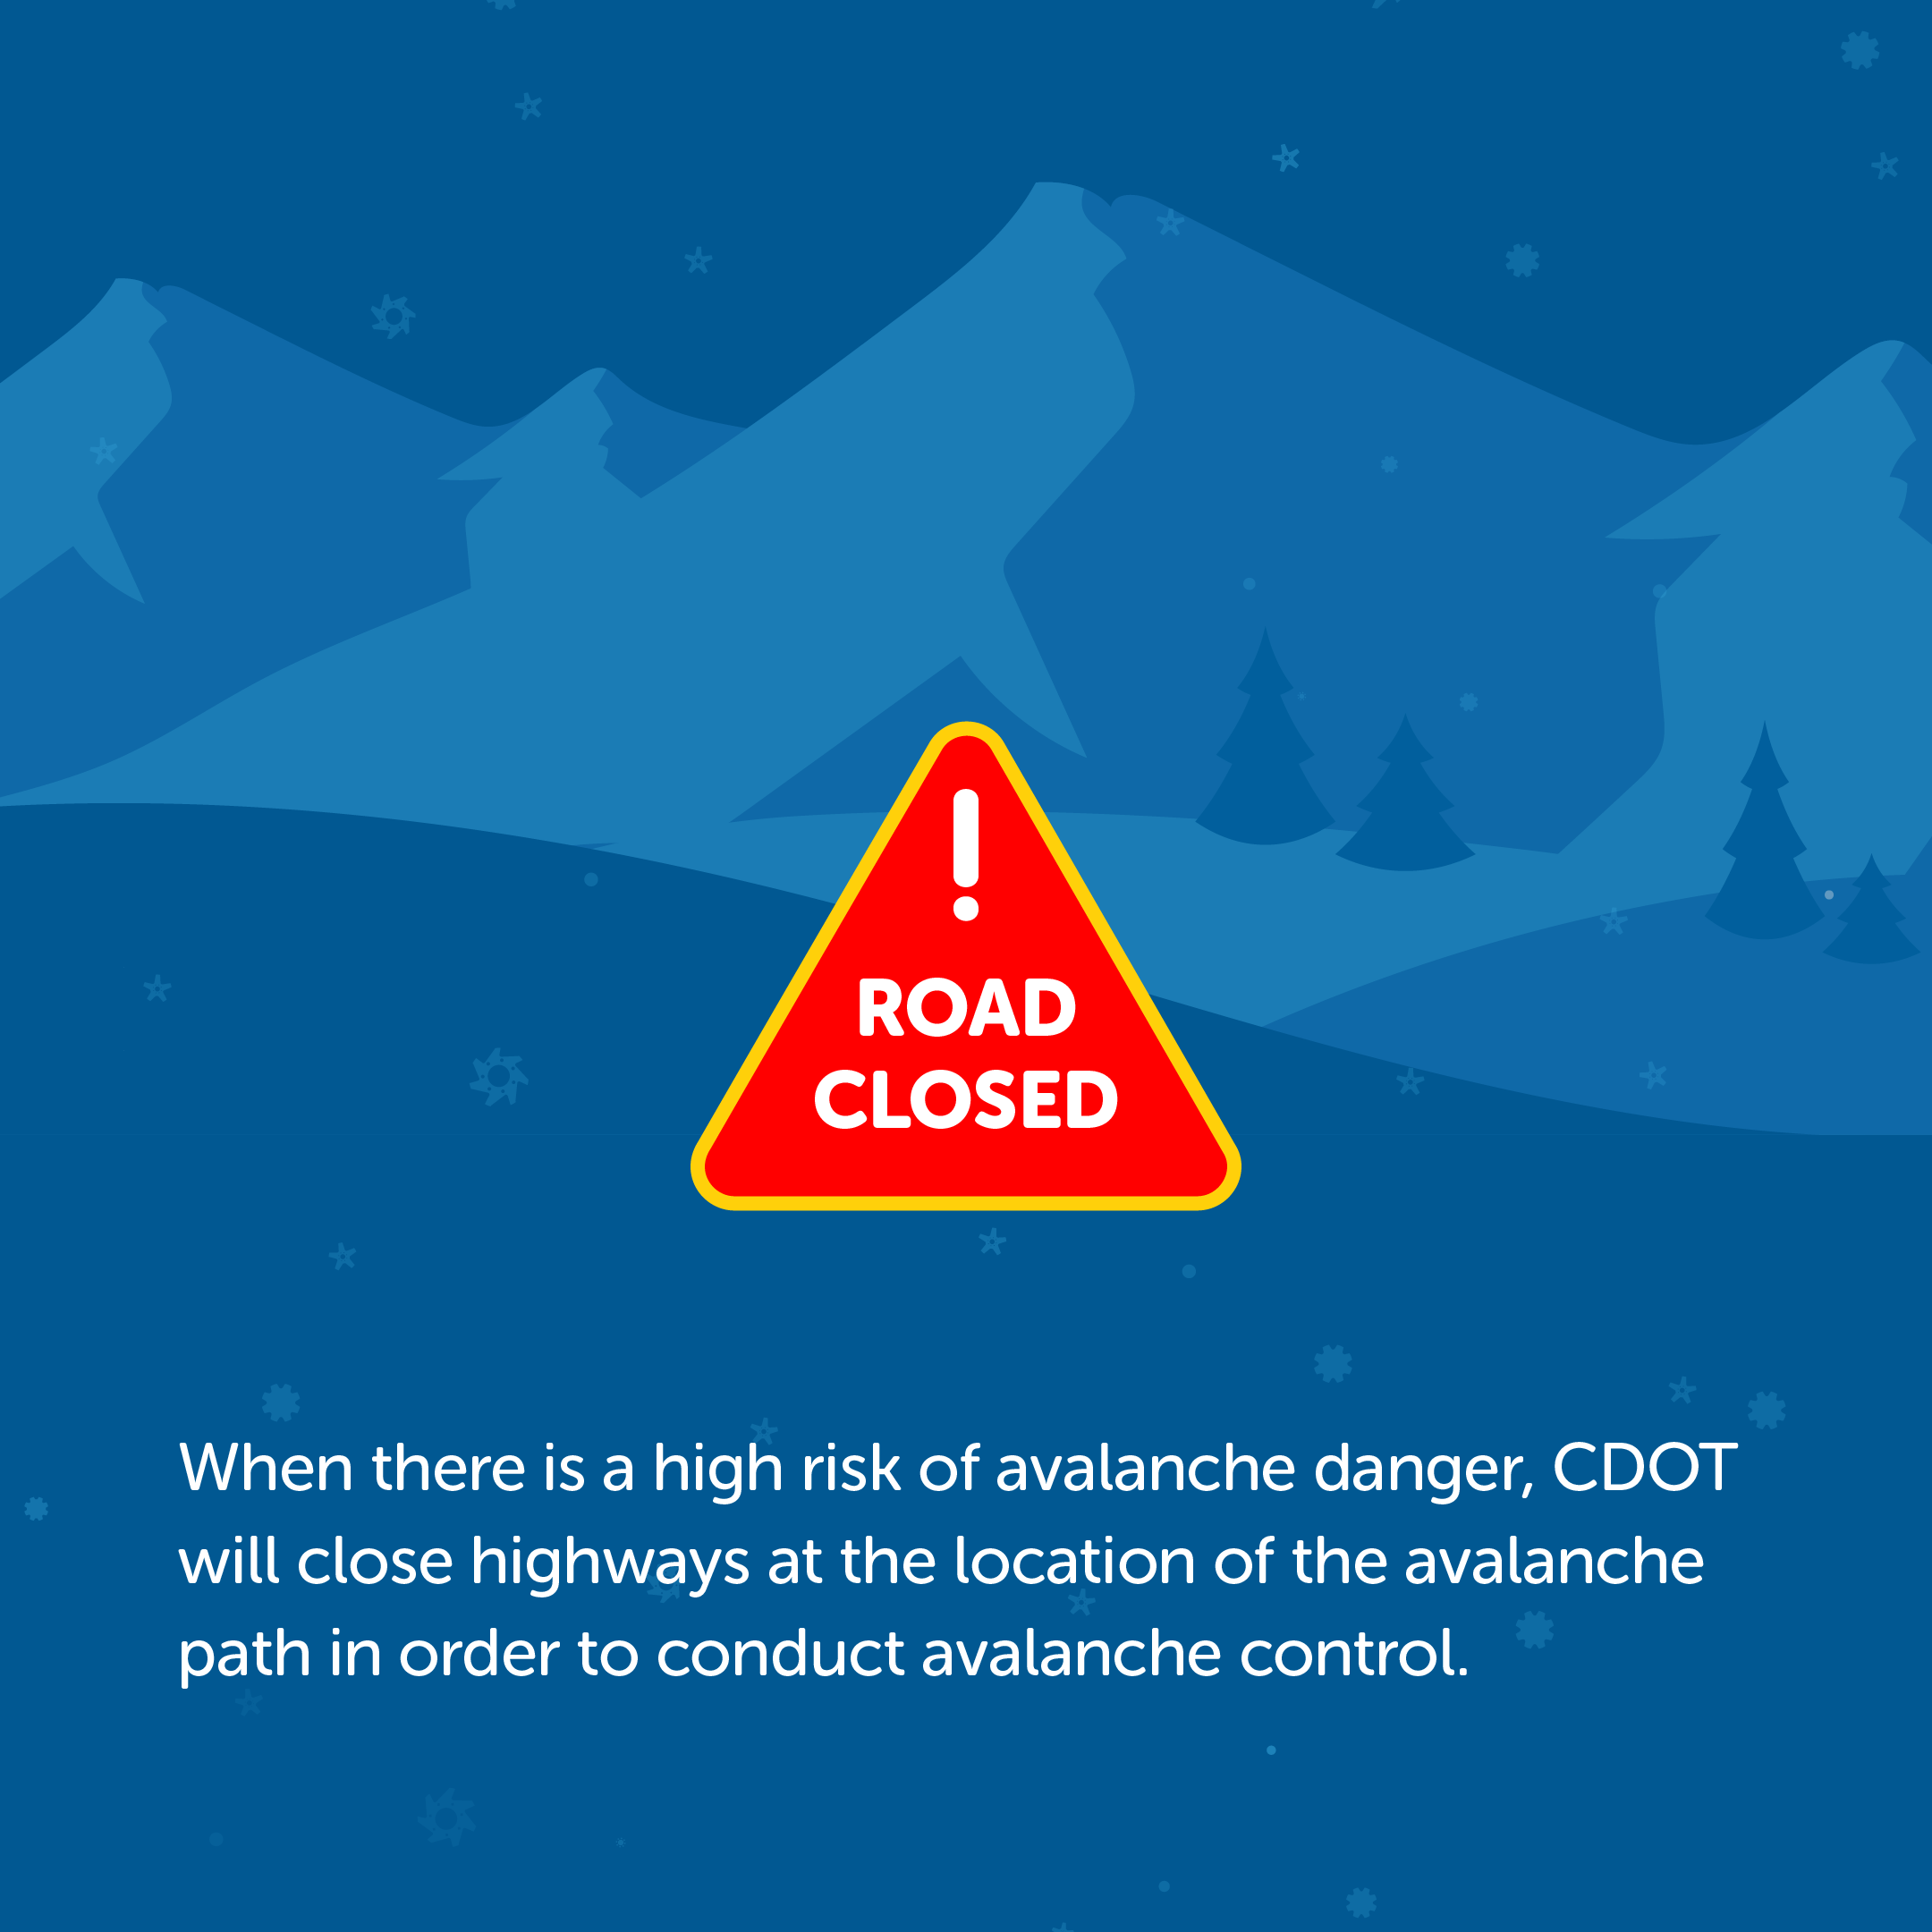 Avalanche Control Page 3 Graphic detail image